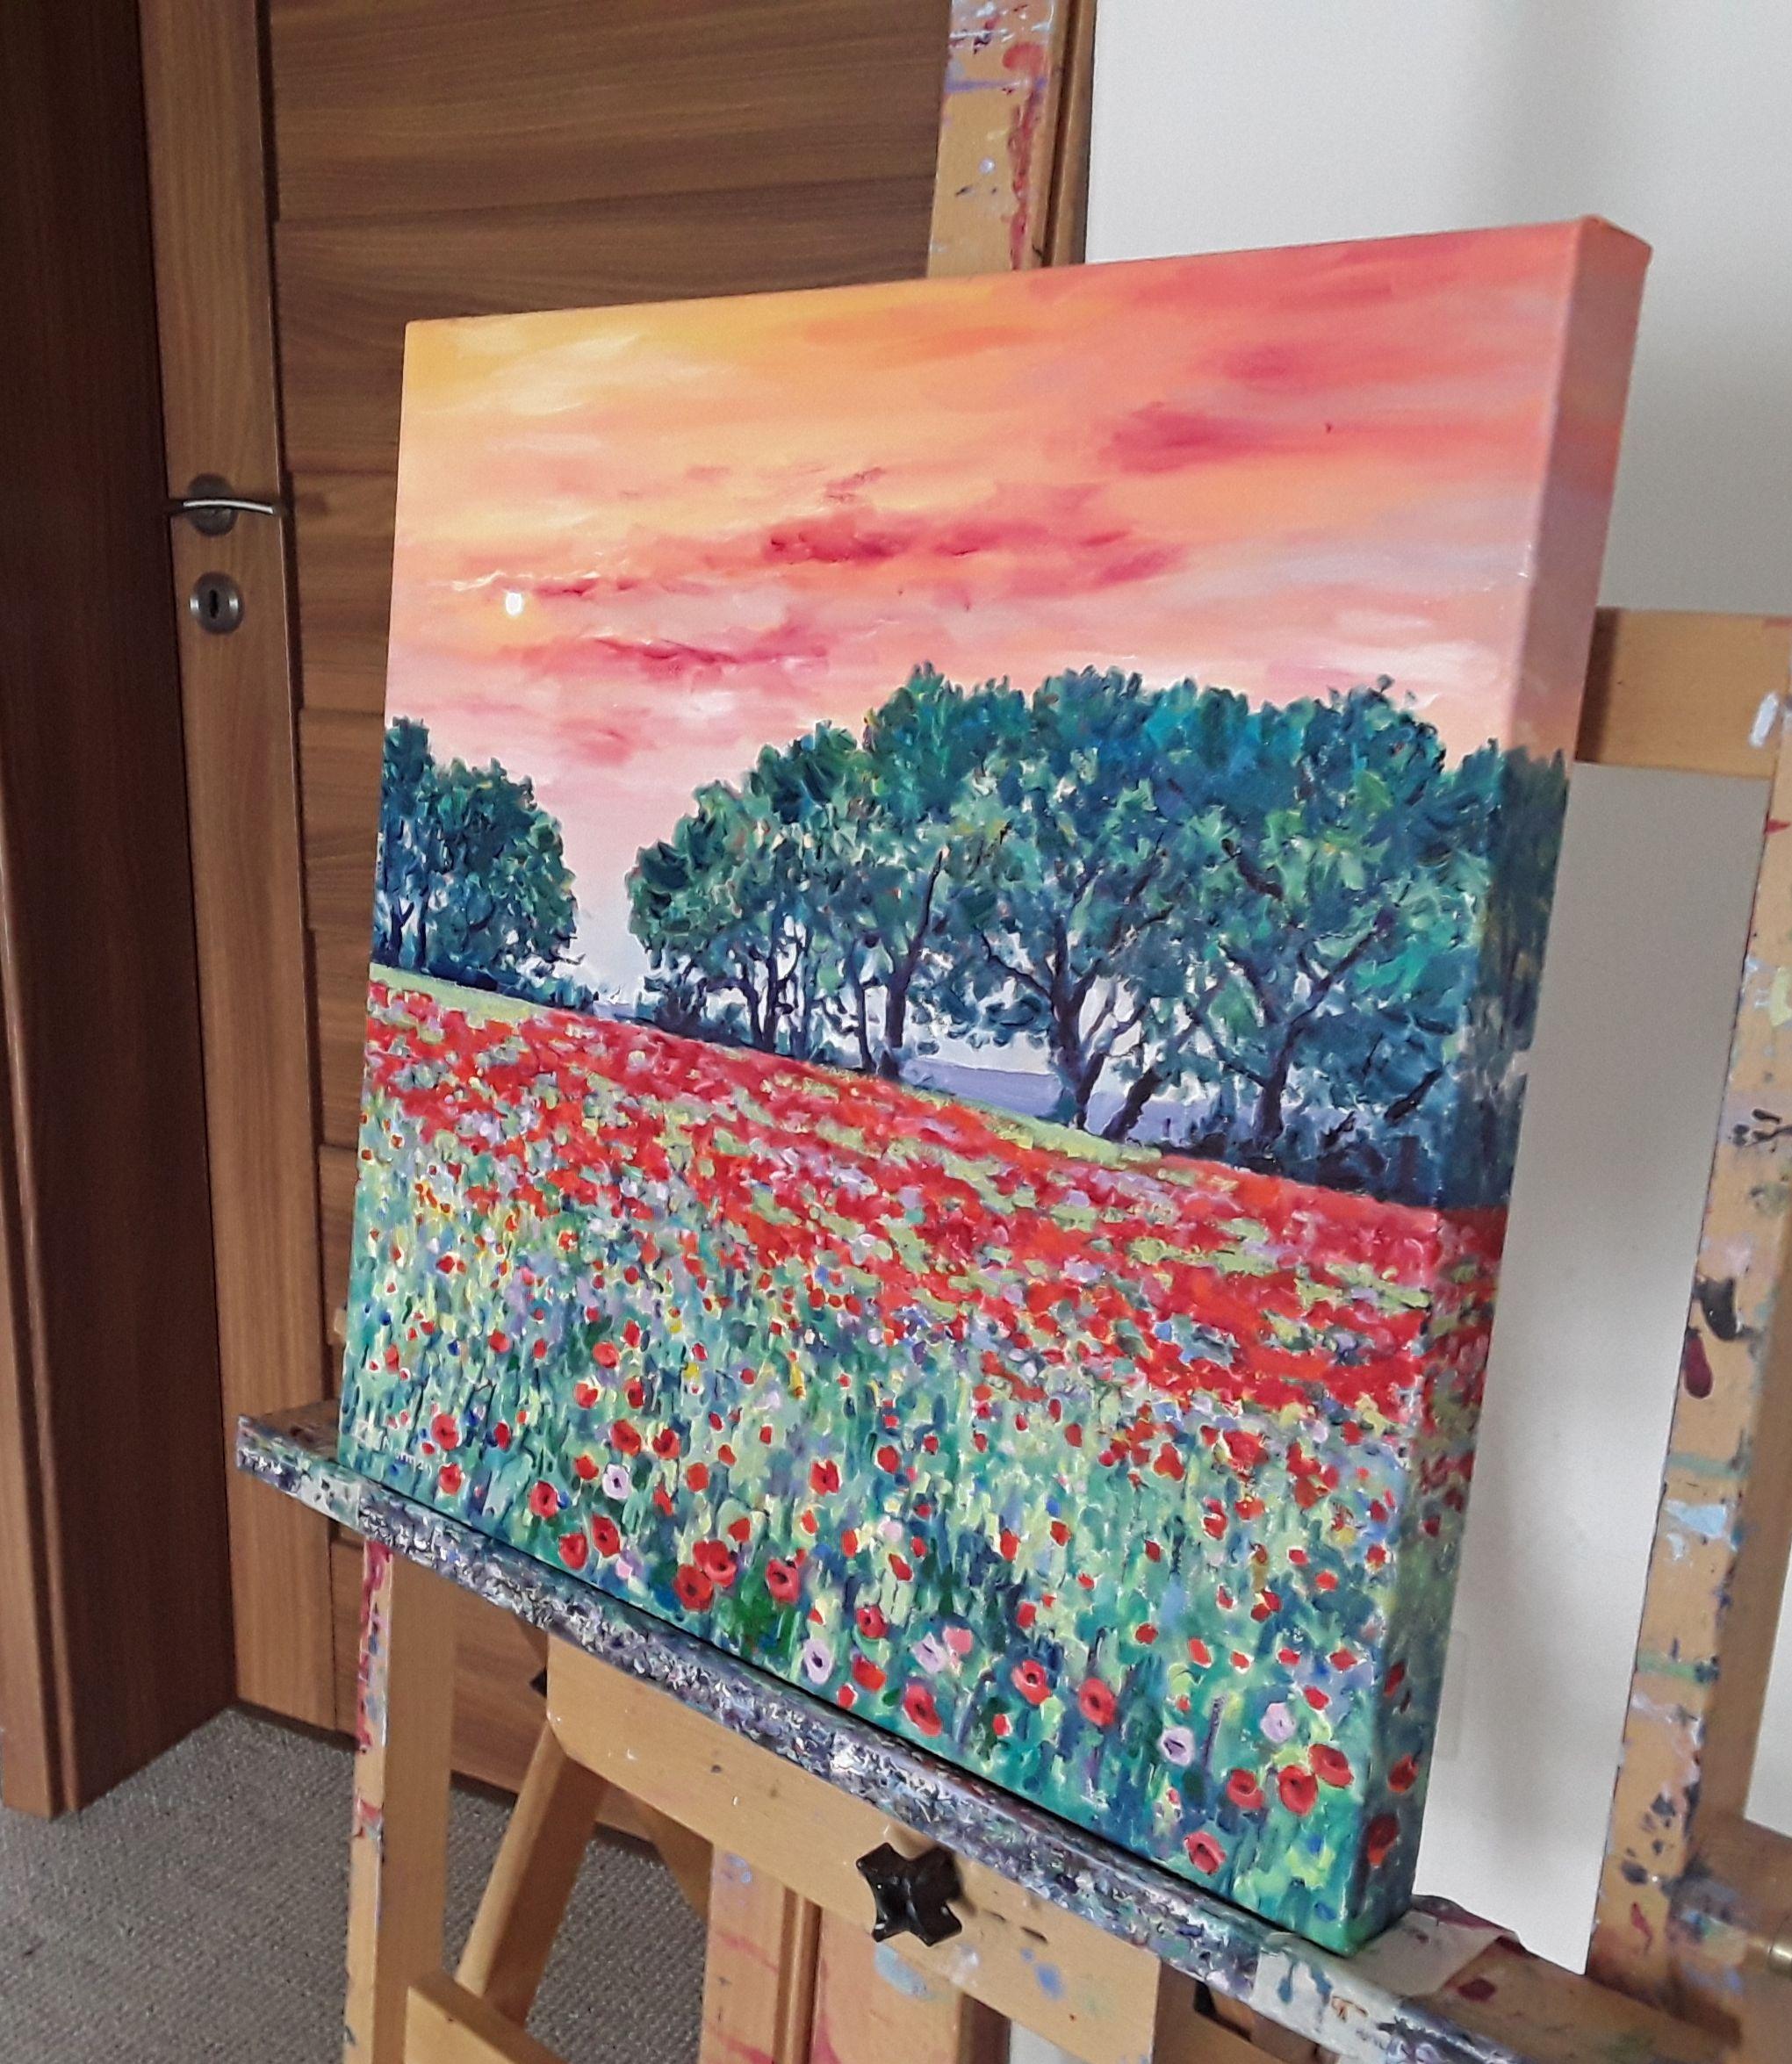 Contemporary Impressionism    Gentle wild flower meadow at sunset, full of swaying red poppies, daisies and wild flowers painted with lively brush strokes in an impressionistic style. Signed on the front and accompanied by a certificate of